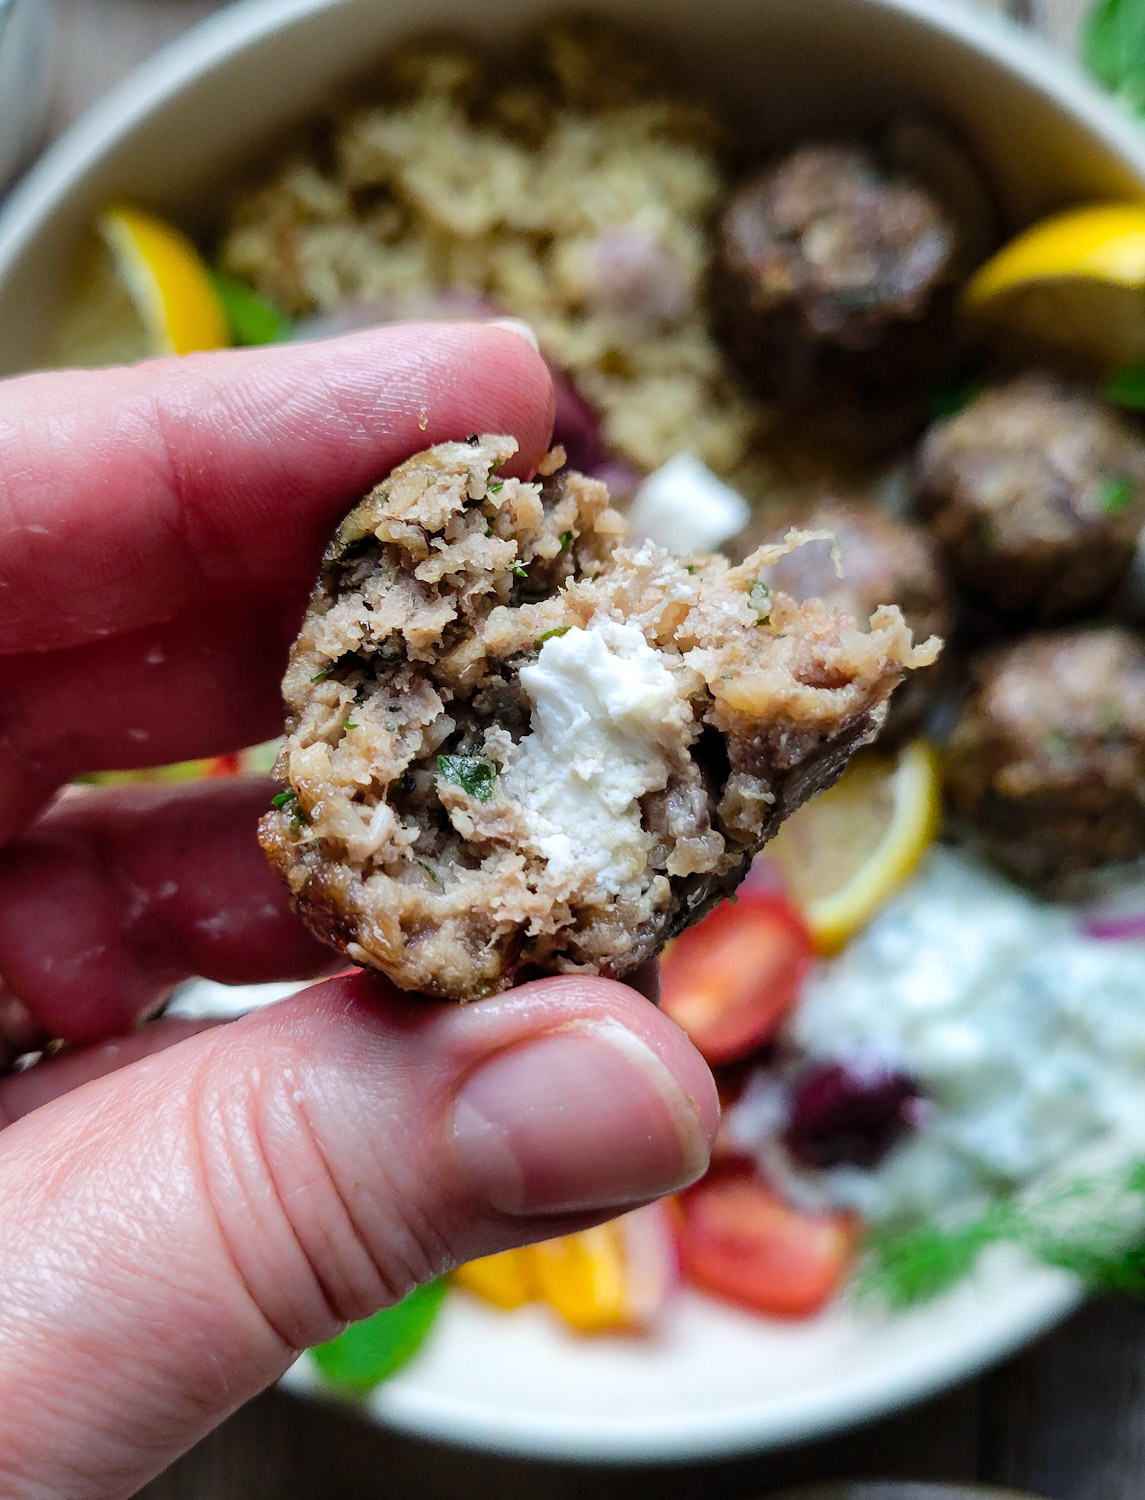 Close up of the interior of a Baked Feta Stuffed Greek Meatball.